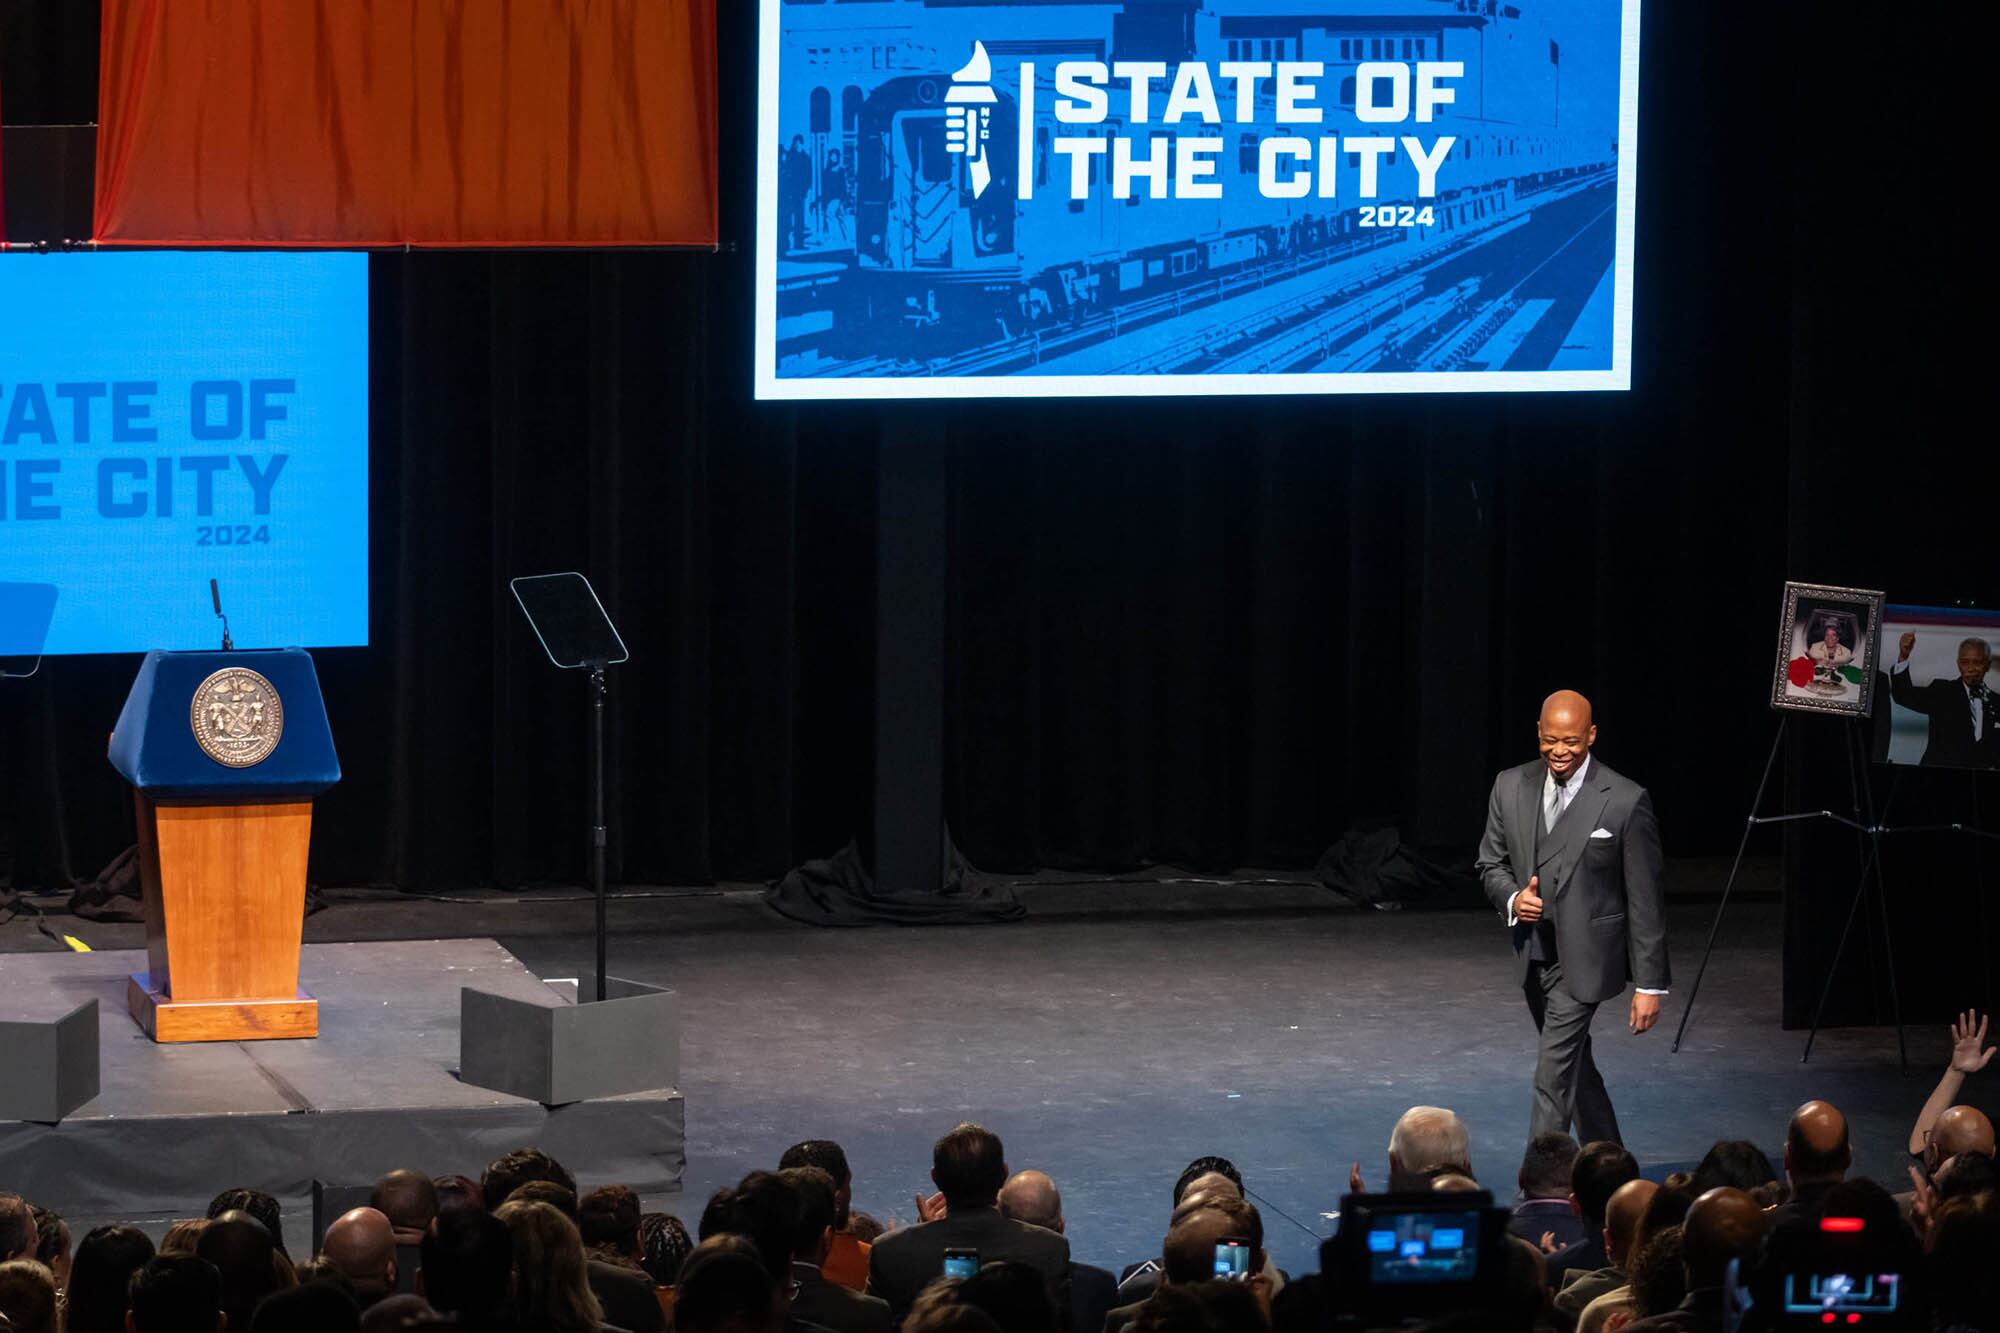 A man wearing a dark suit walks across a stage with people sitting in chairs in the foreground and a large blue screen that reads "State of the City."